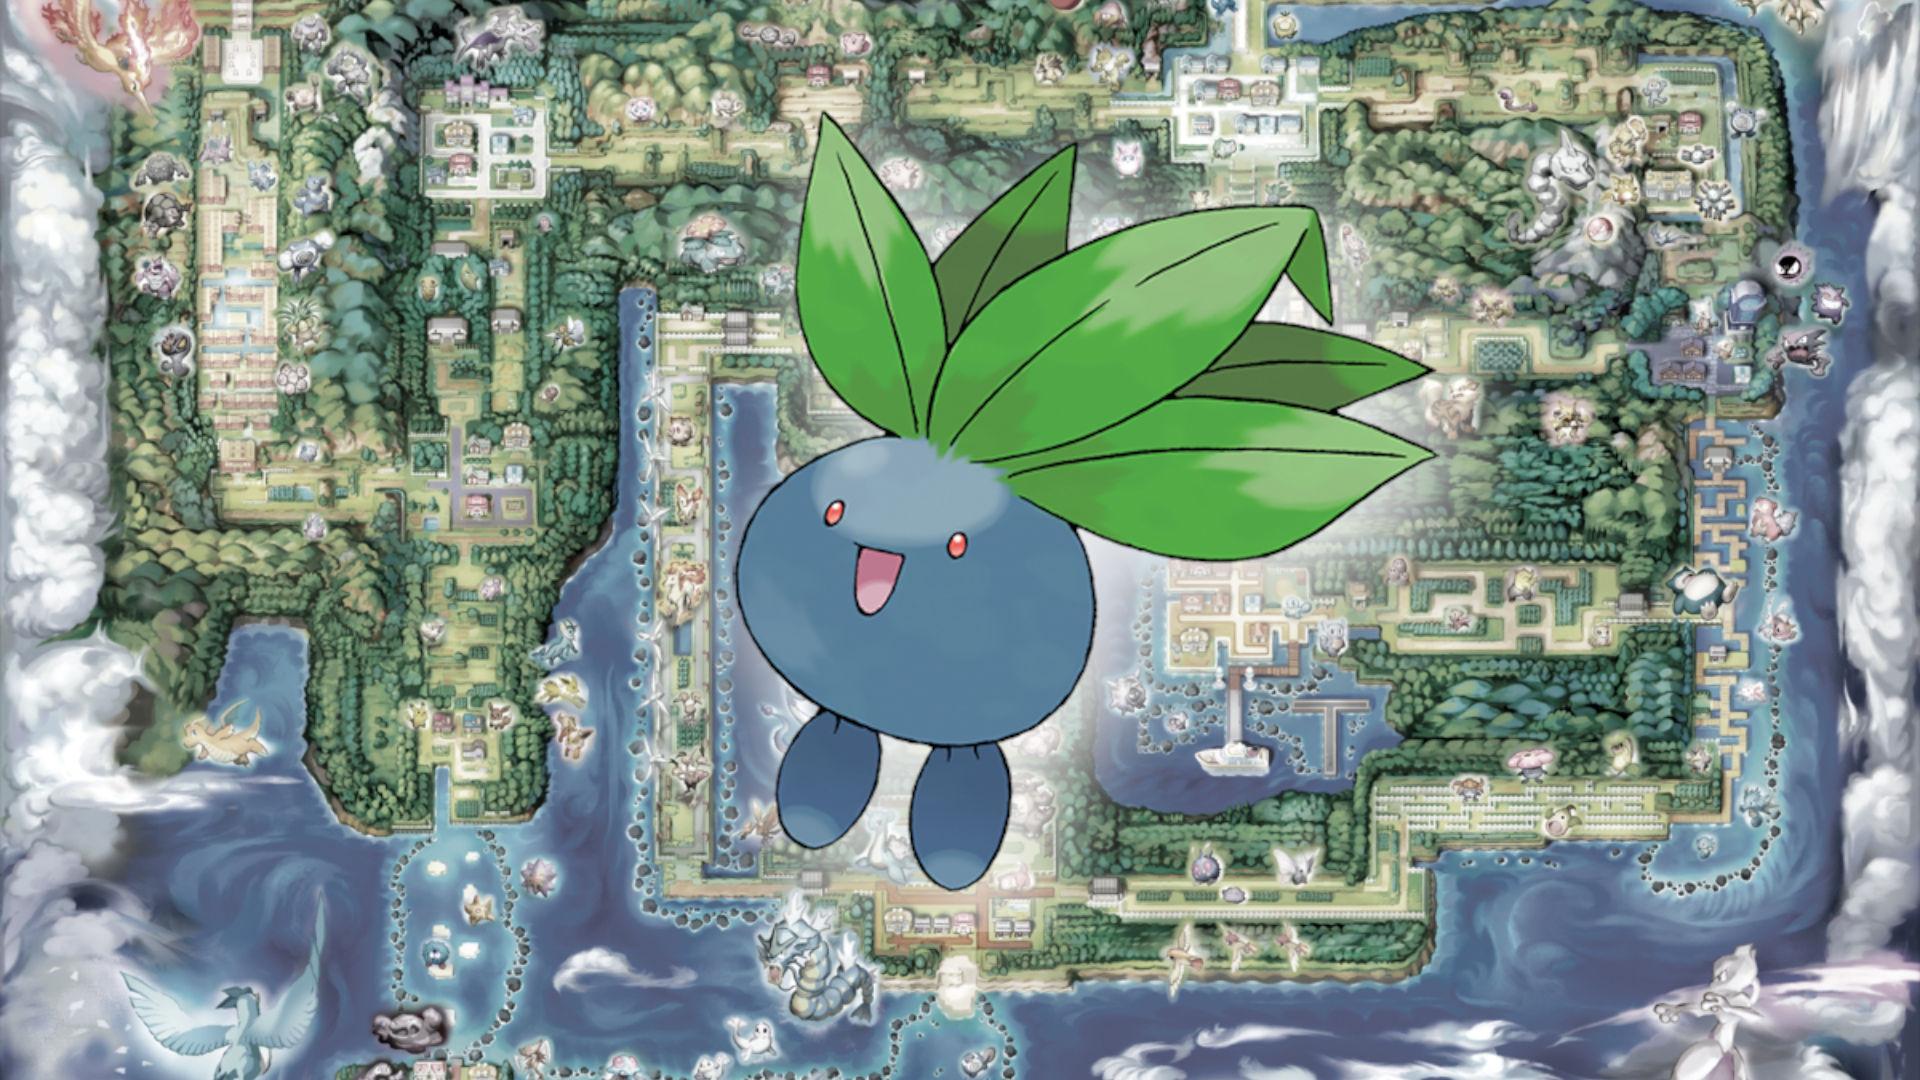 Gloom evolution - Oddish in front of a map of Kanto